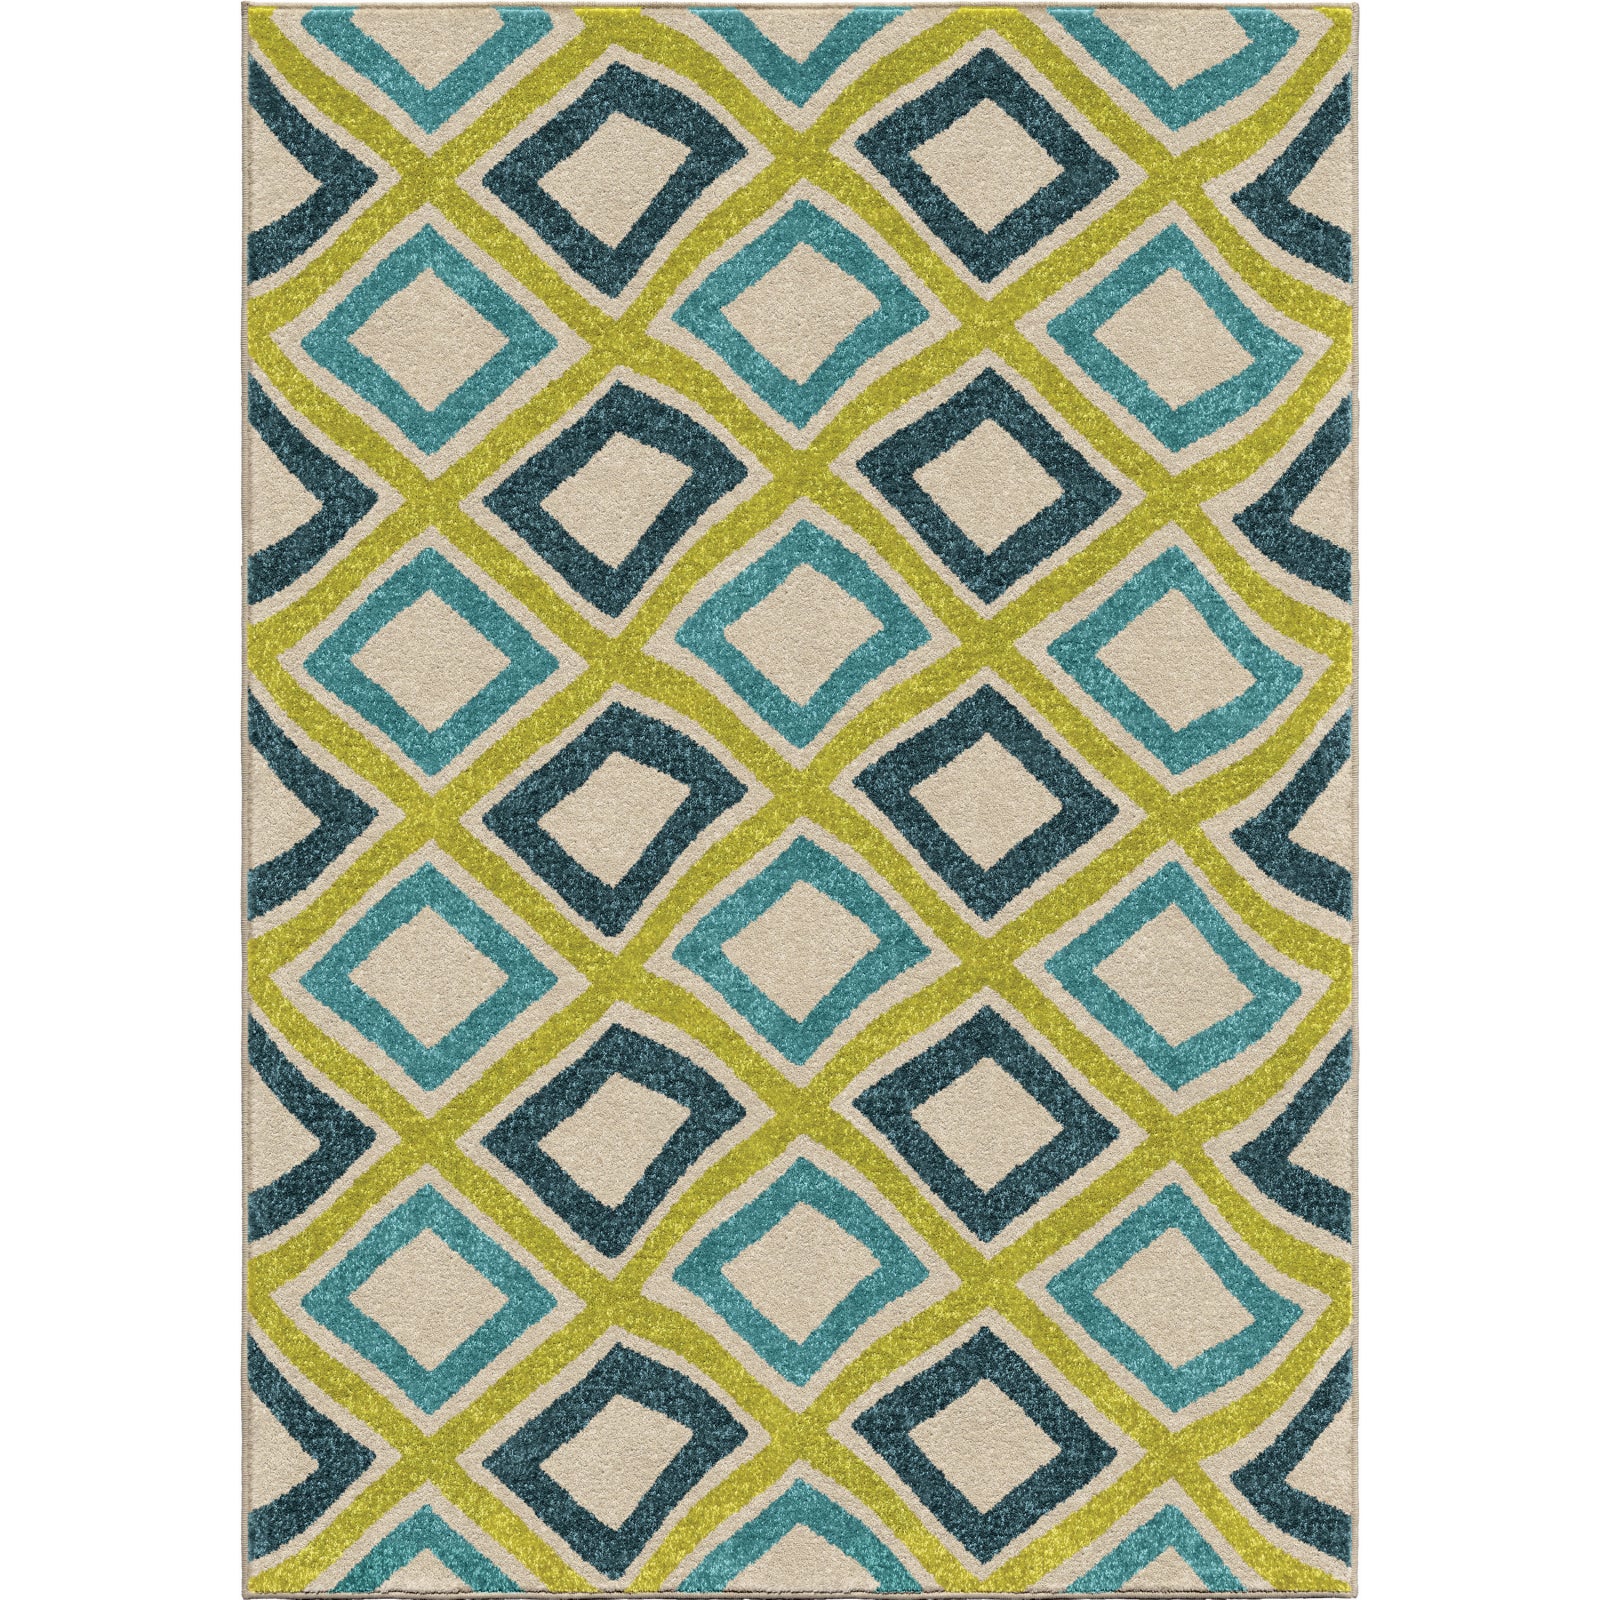 Orian Rugs Promise Swirly Squares Green Area Rug main image